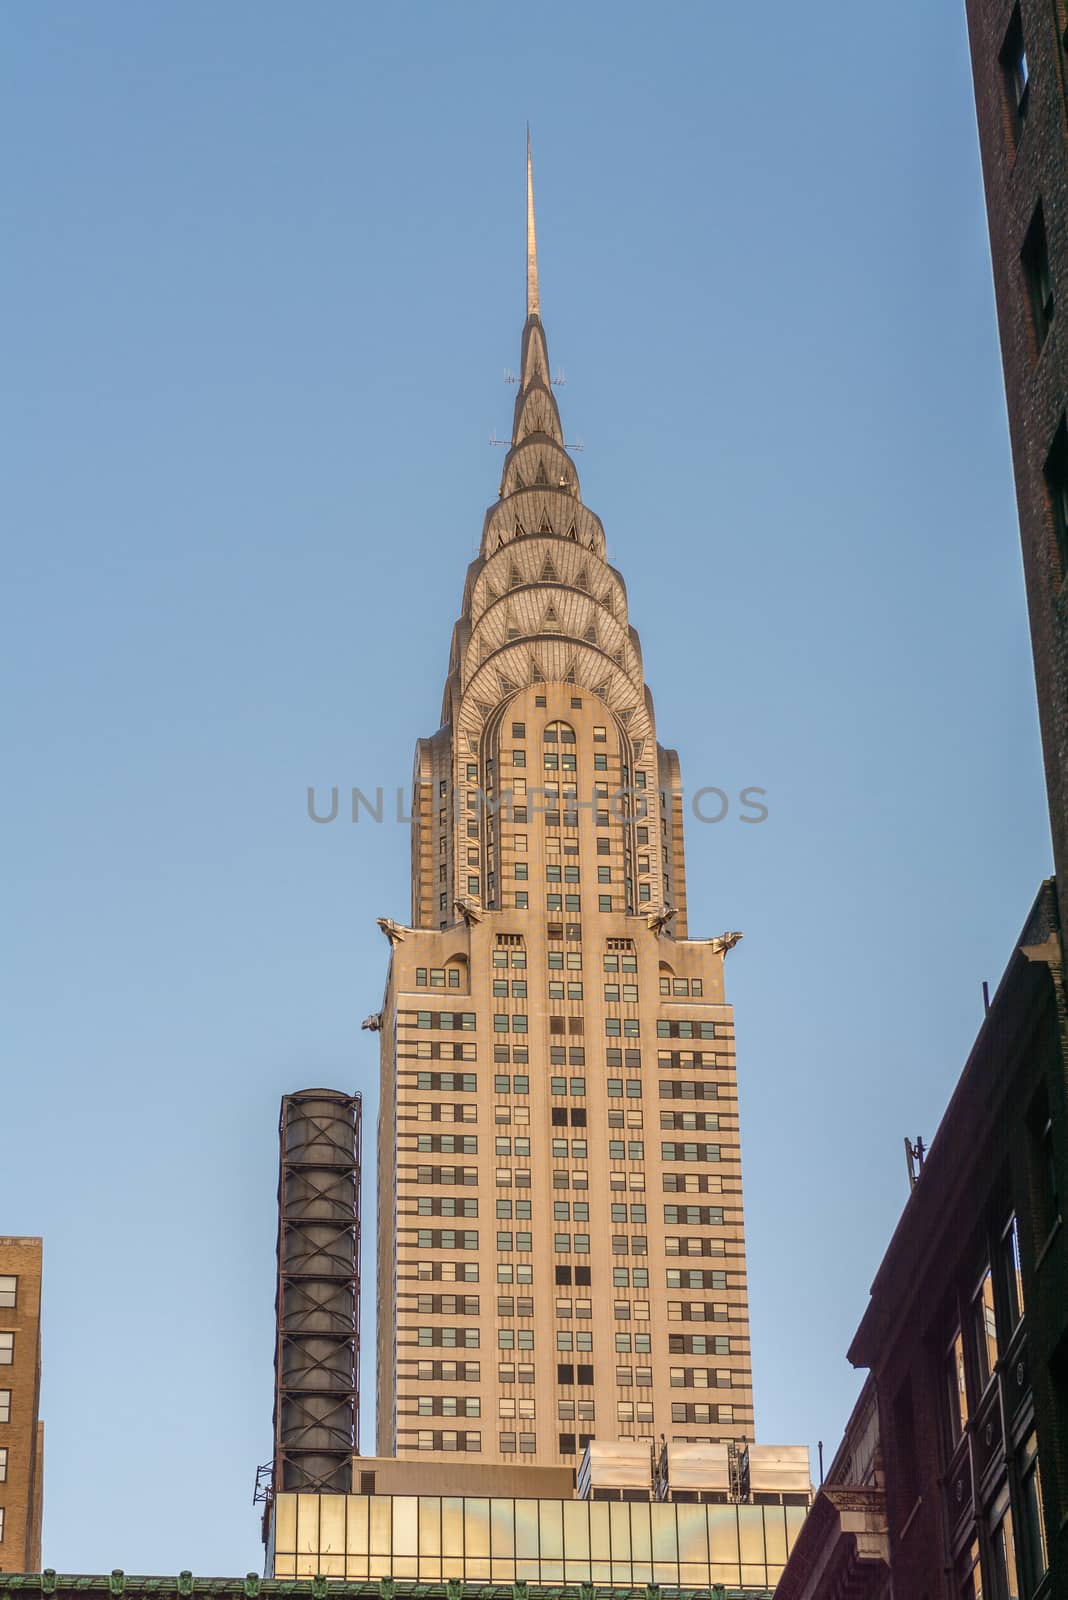 NEW YORK CITY - JUN 8: The Chrysler Building, pictured on June 8 by jovannig